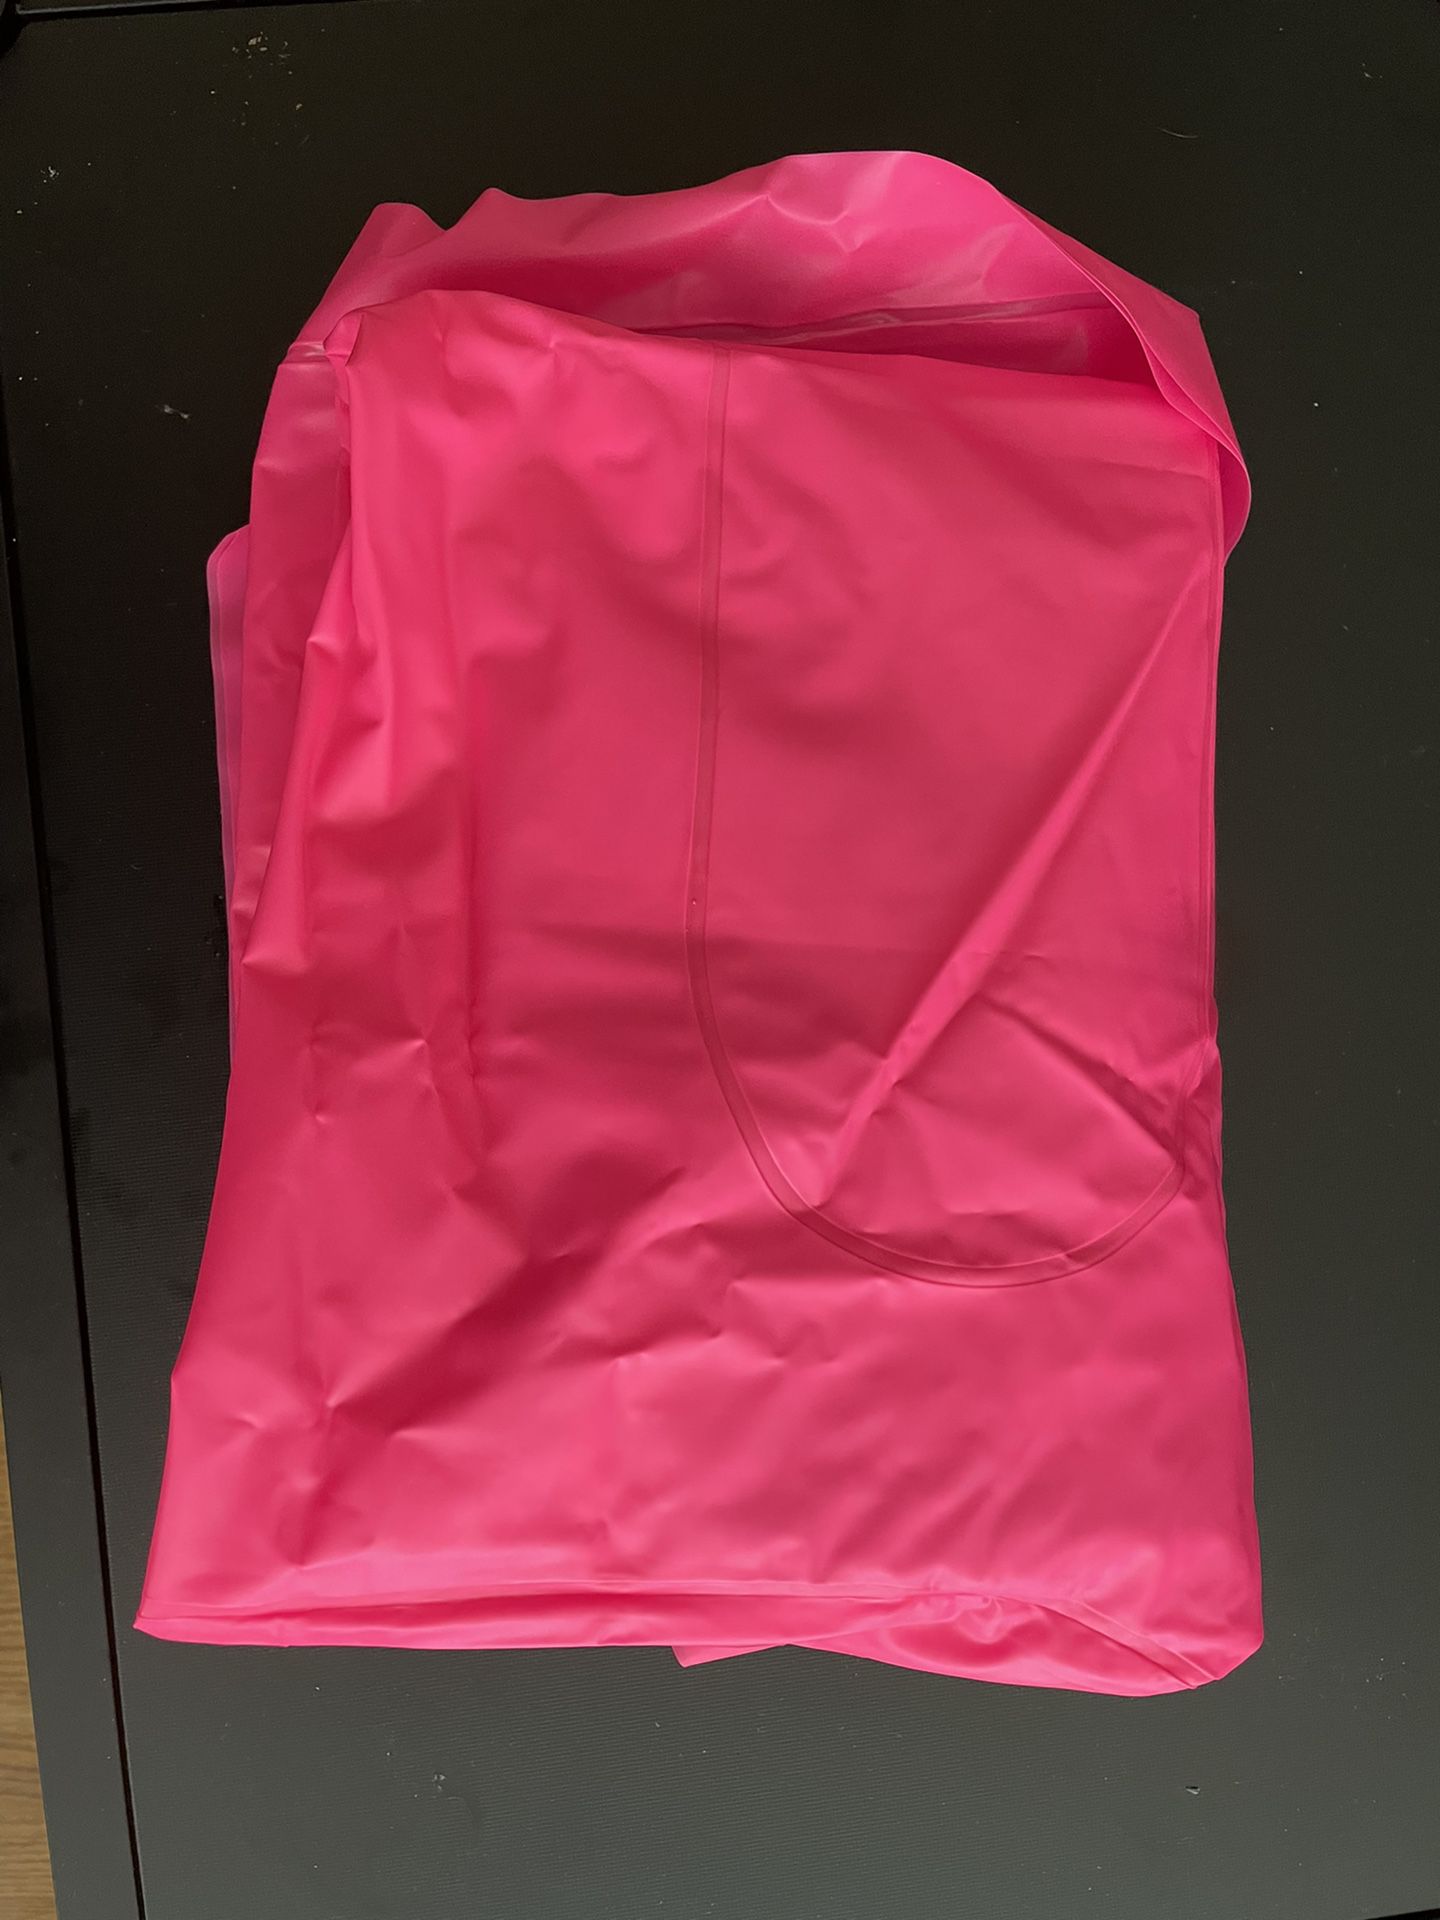 Large Pink Float (inflatable ) 